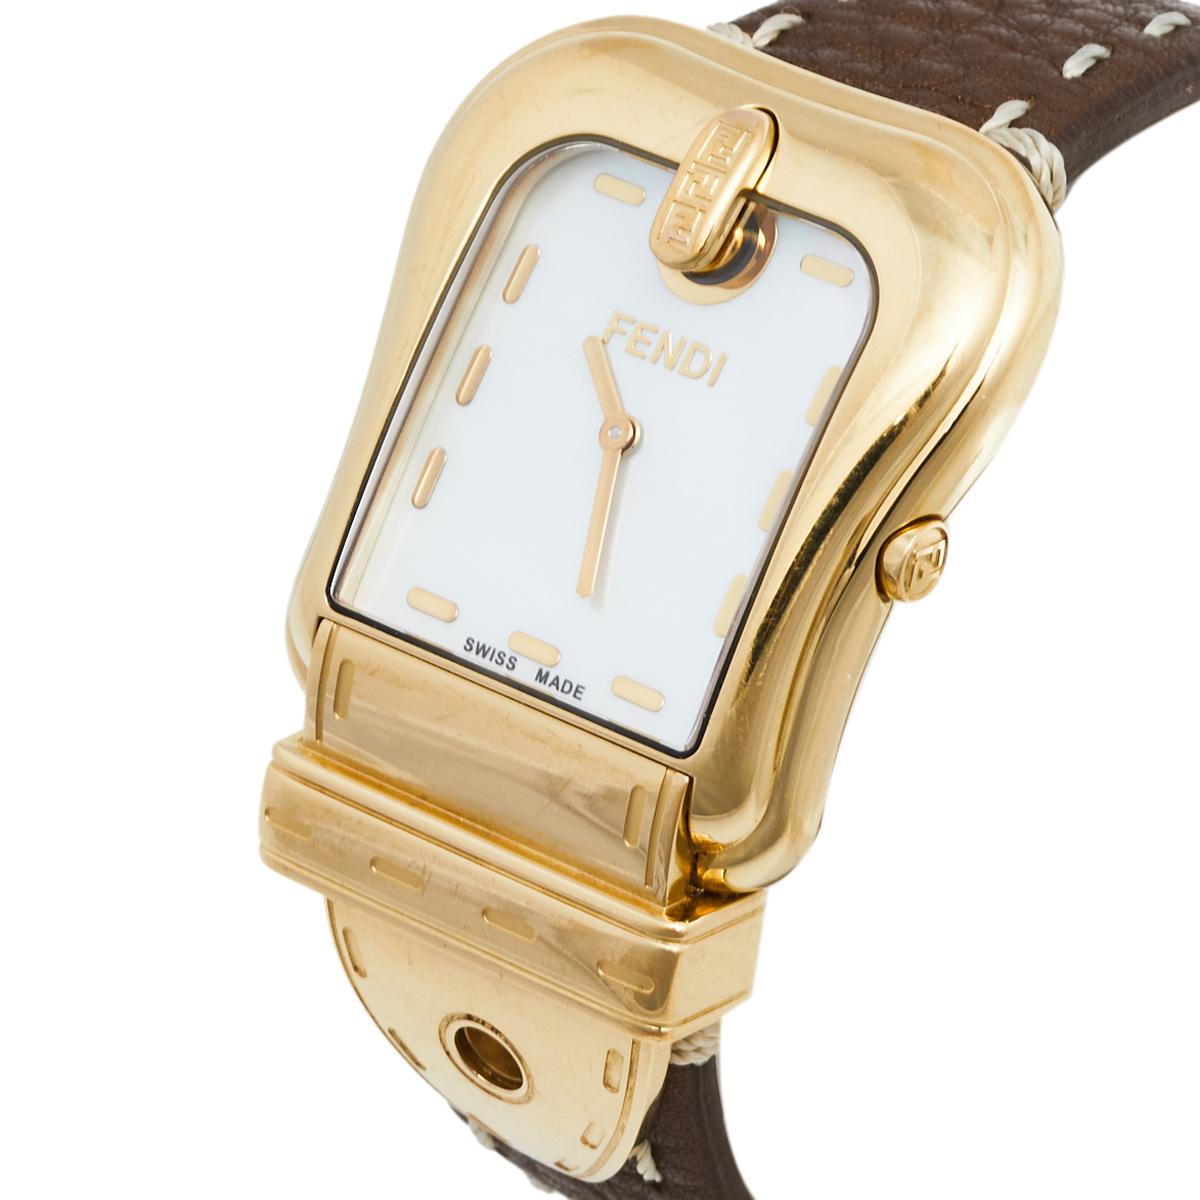 This wristwatch from Fendi is here to remind you that you deserve only the best. Swiss-made and created from gold-plated stainless steel, this watch flaunts a buckle-like case. It has a quartz movement and a Mother of Pearl dial with stitch hour